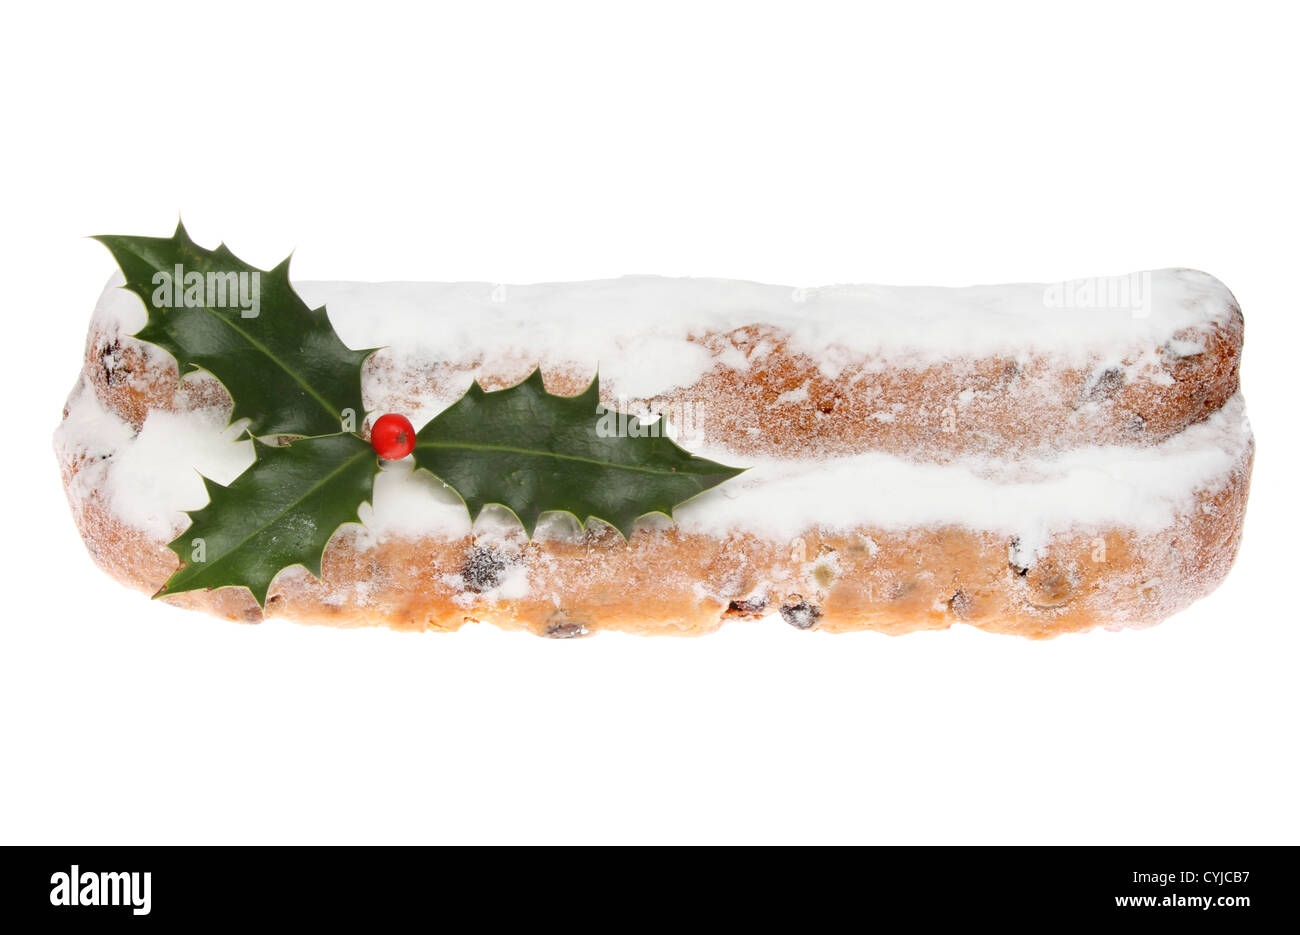 Icing sugar dusted Christmas stollen with a sprig of holly isolated against white Stock Photo